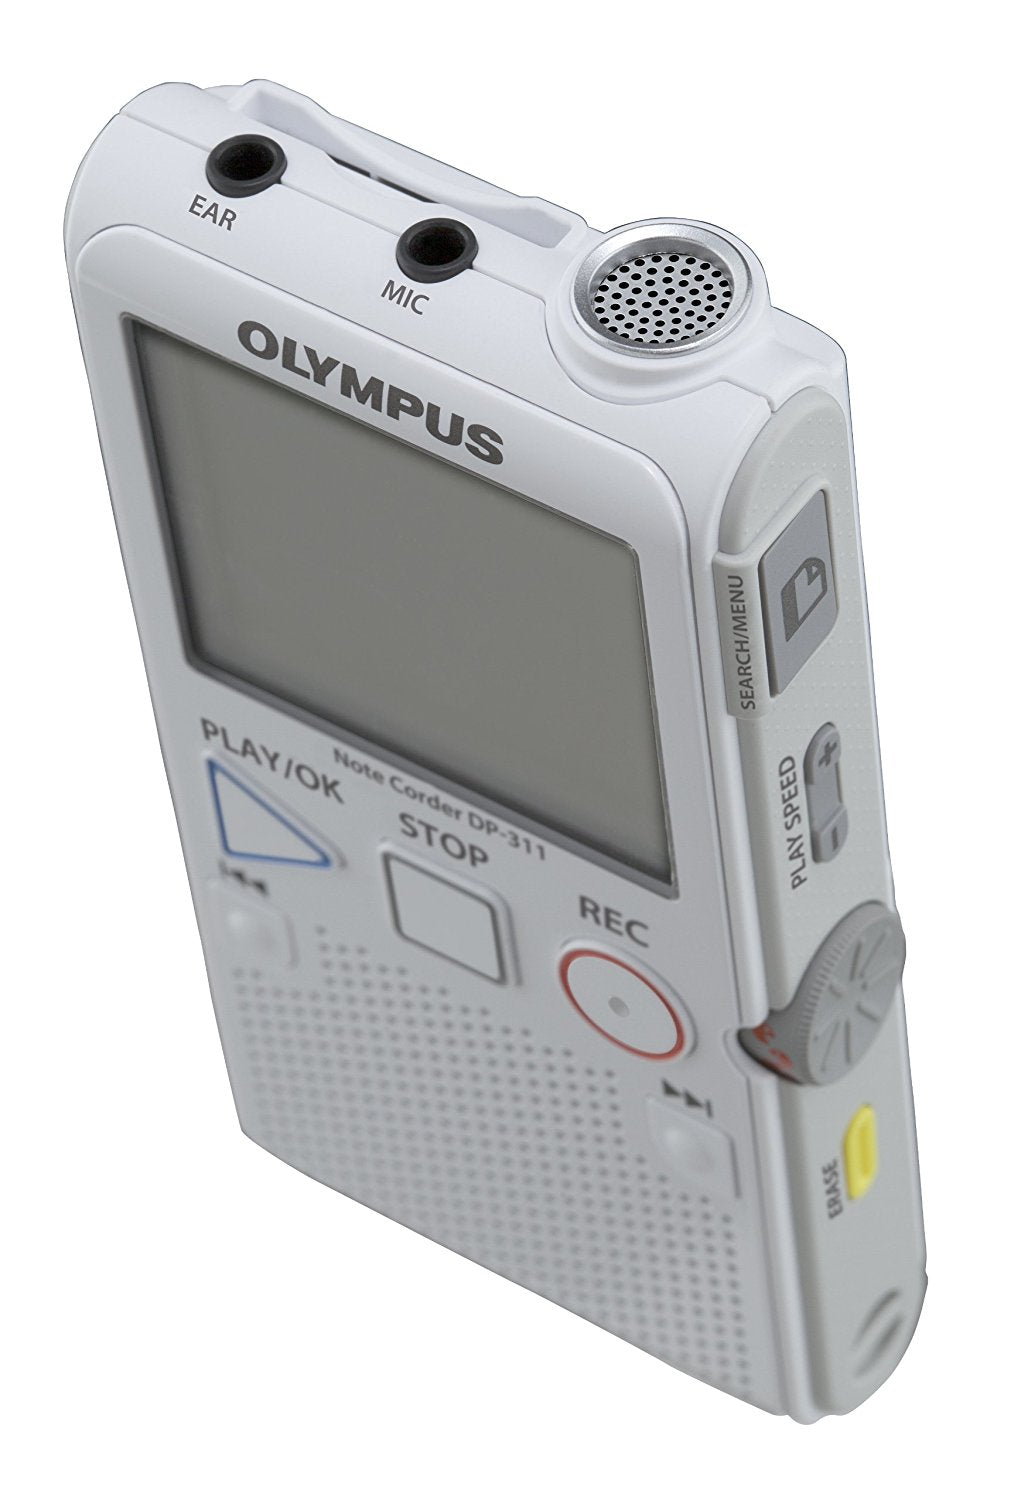 Olympus DP-311 2GB Voice Recorder, Silver with SD Card Slot & Built-in Stand (2 AAA batteries required)- Refurbished